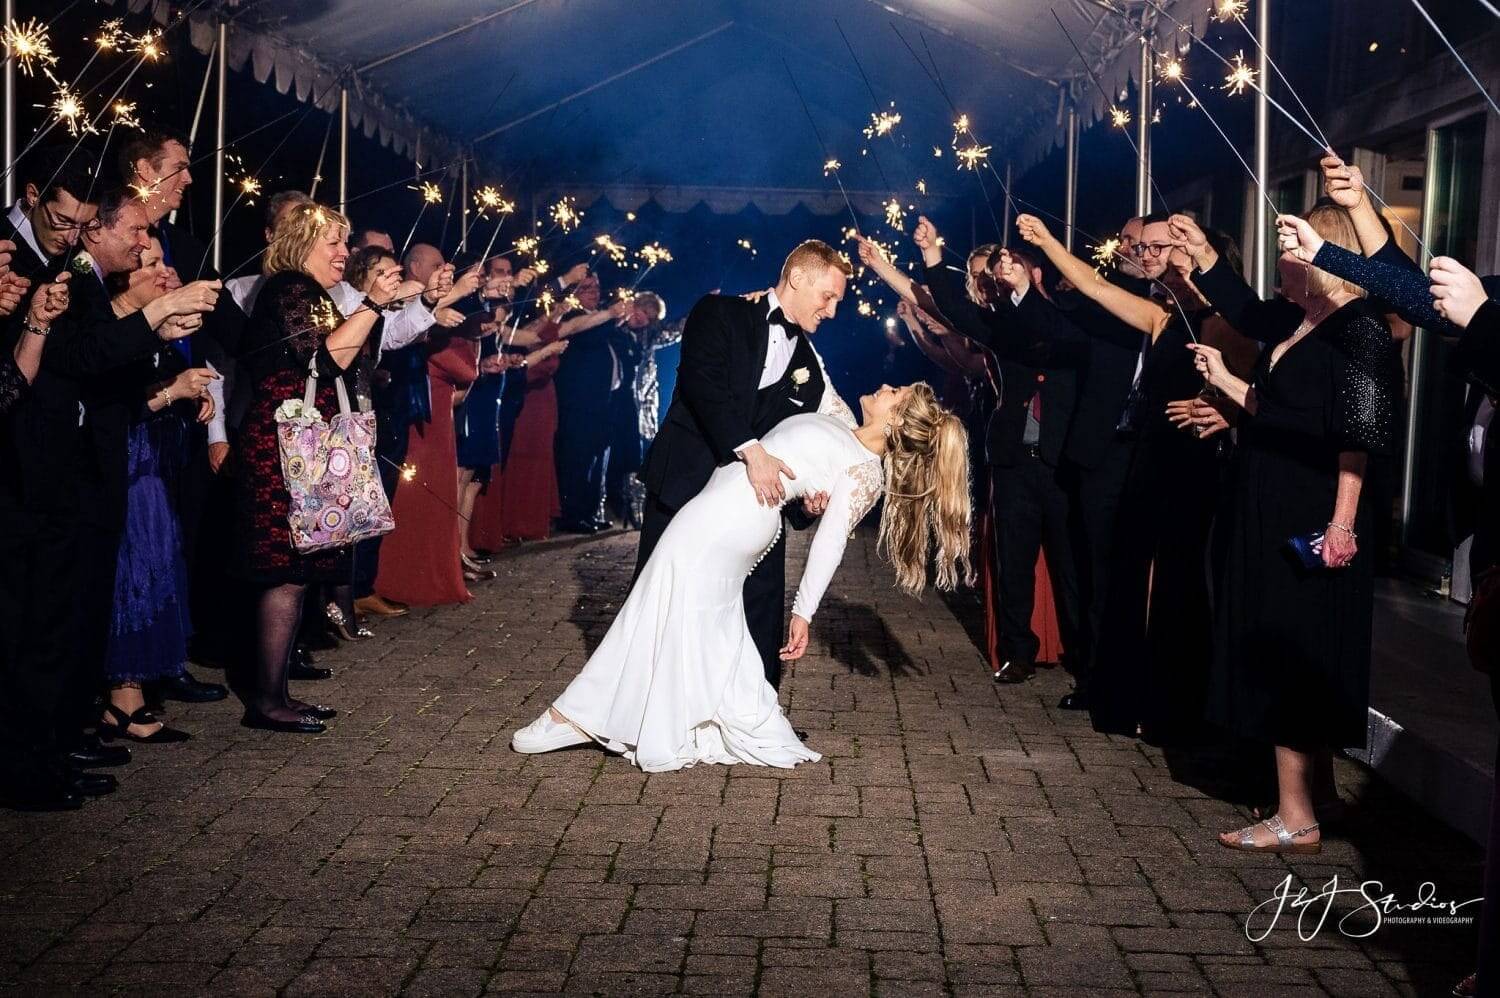 A bride and groom kissing in front of a crowd of sparklers at their wedding packages event.